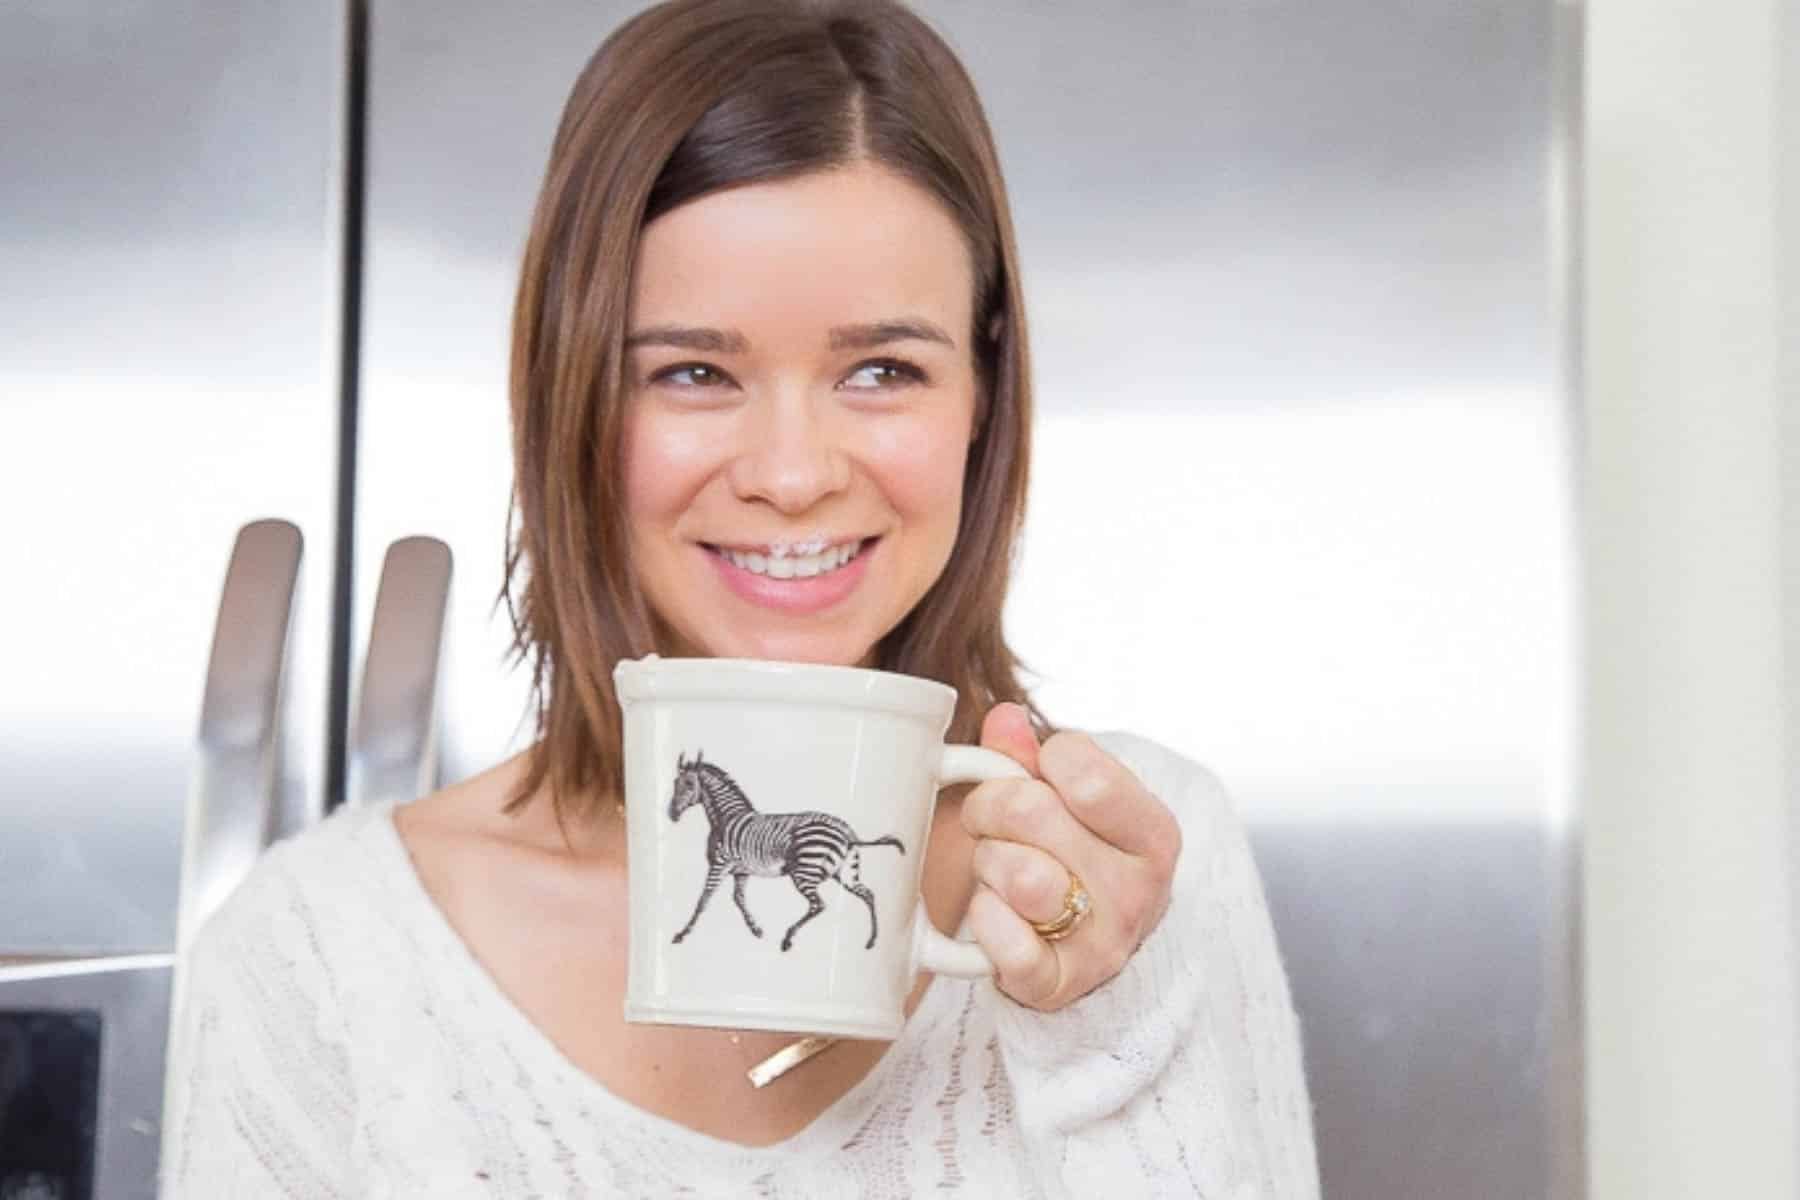 Girl smiling and sipping from mug with zebra on it.